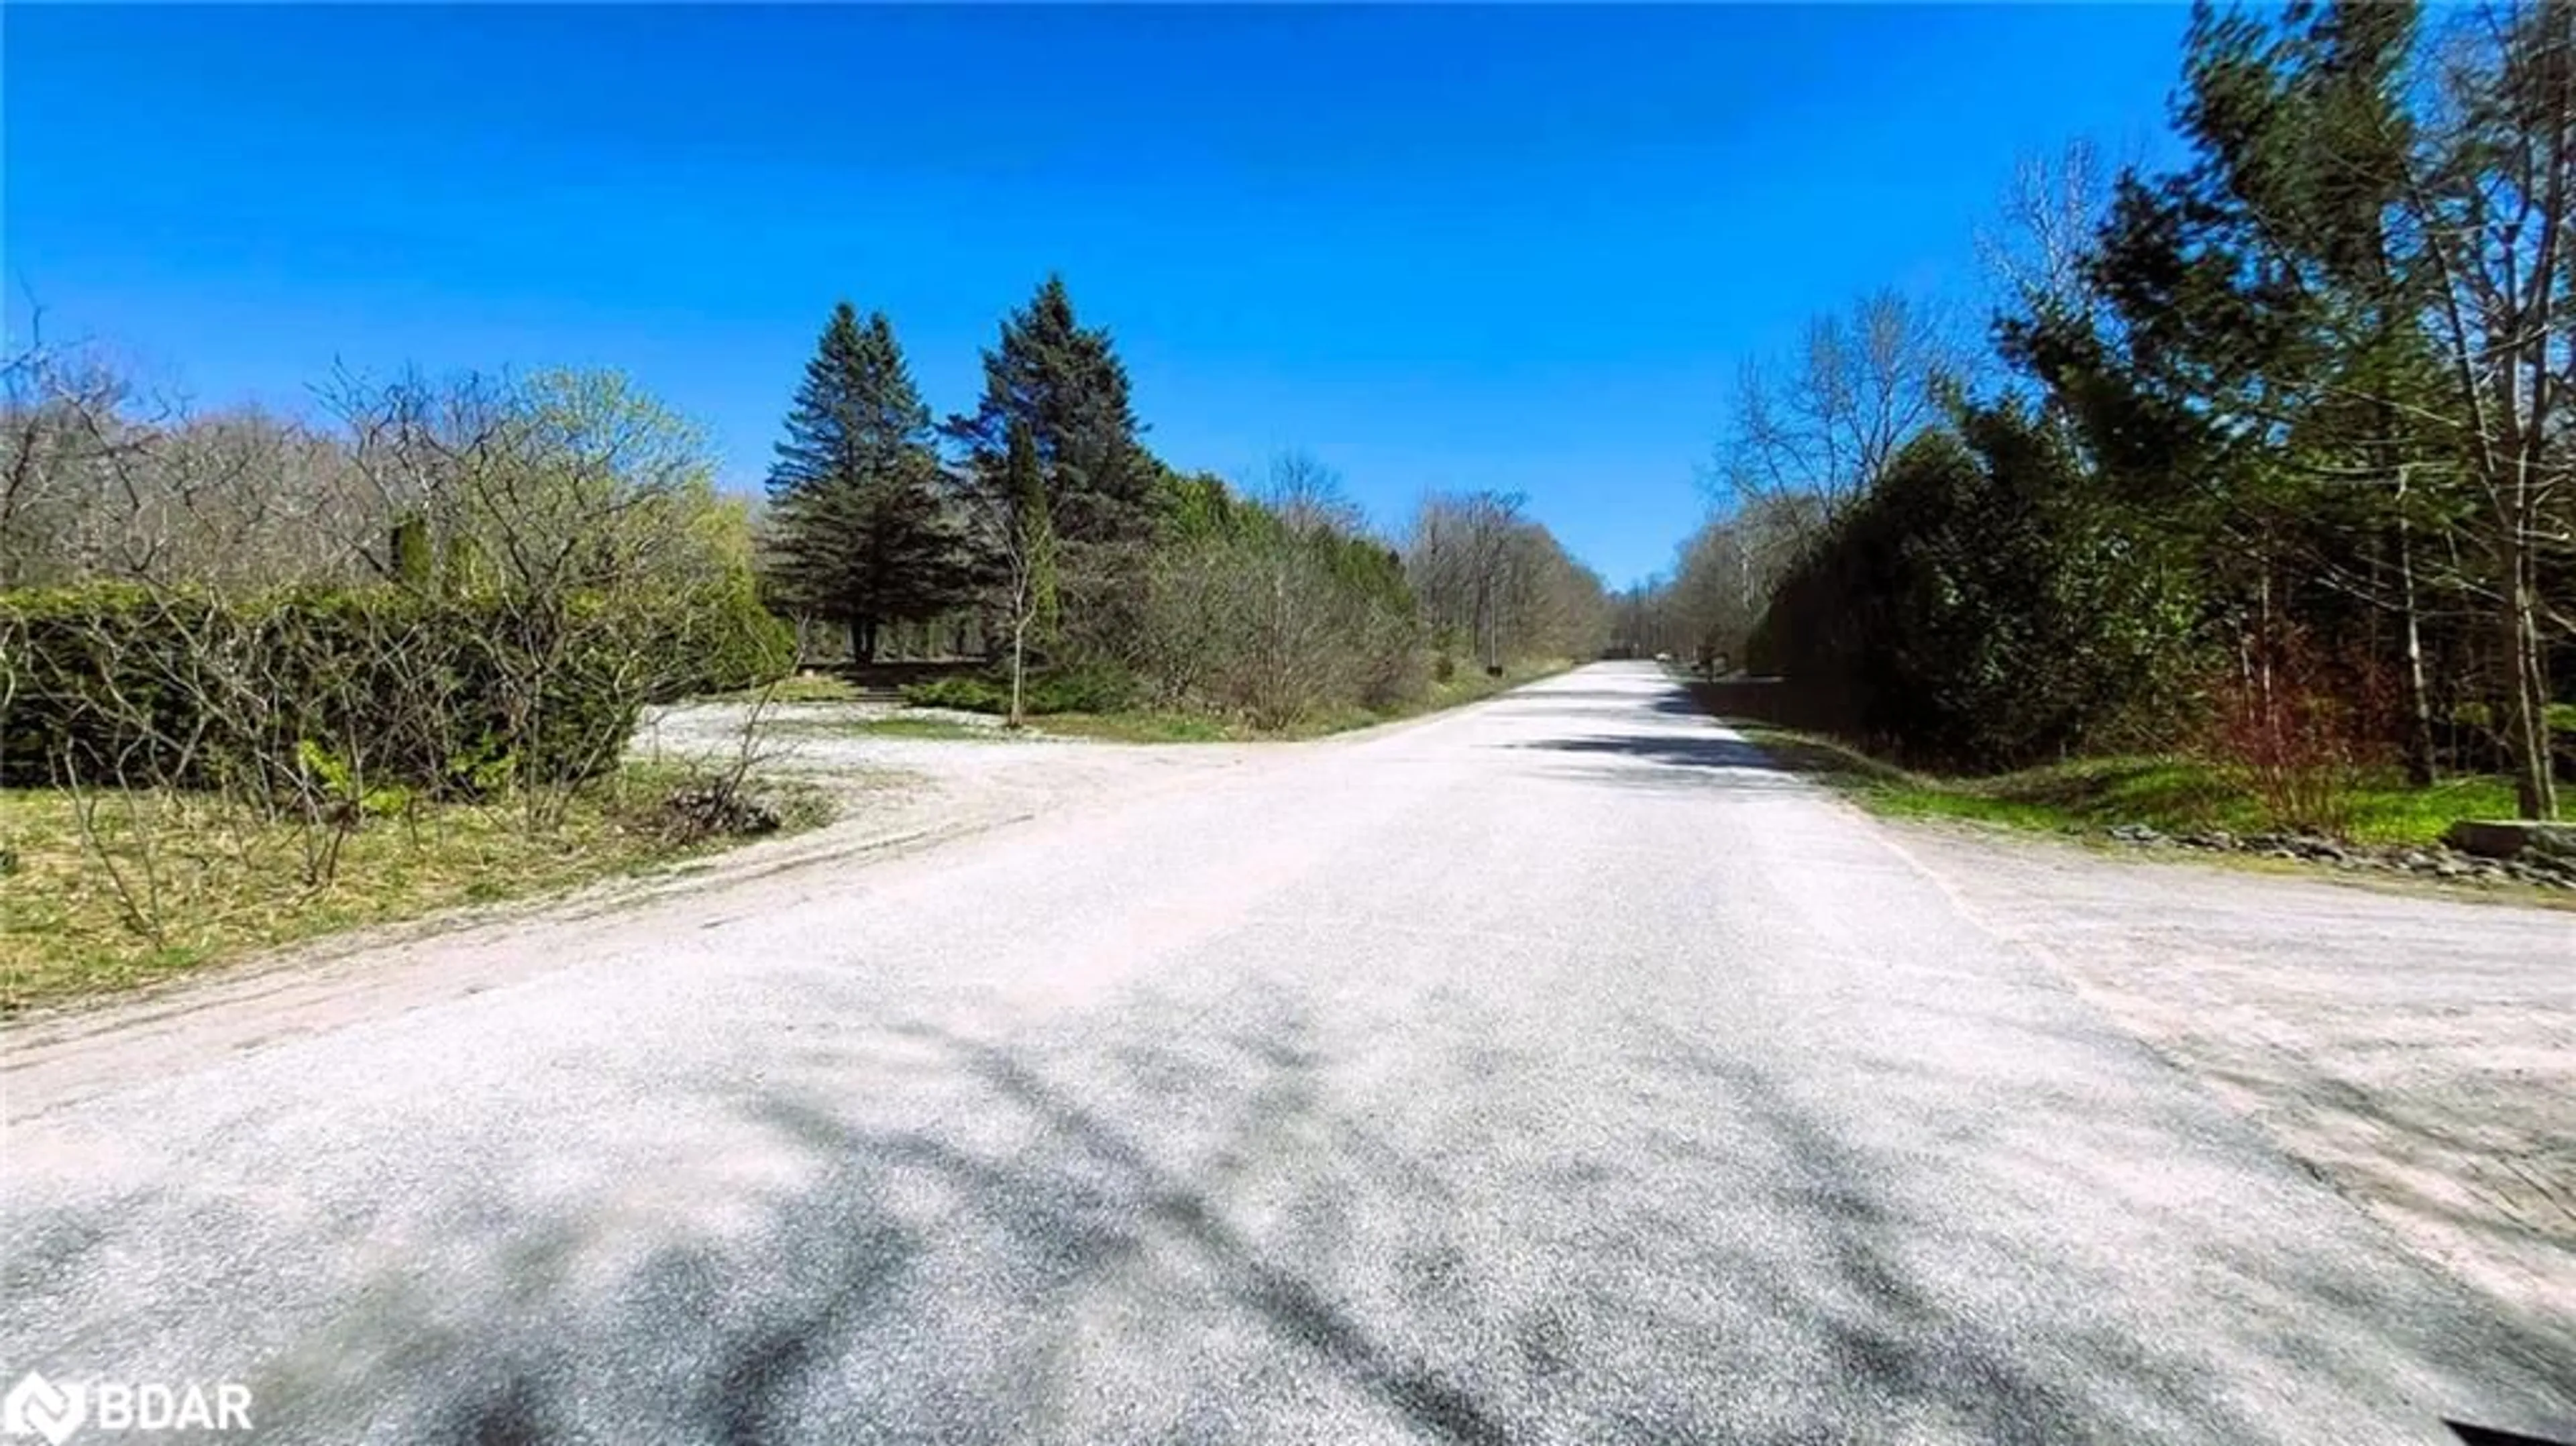 Street view for 3 Forest Wood Lane, Oro-Medonte Ontario L0L 1T0